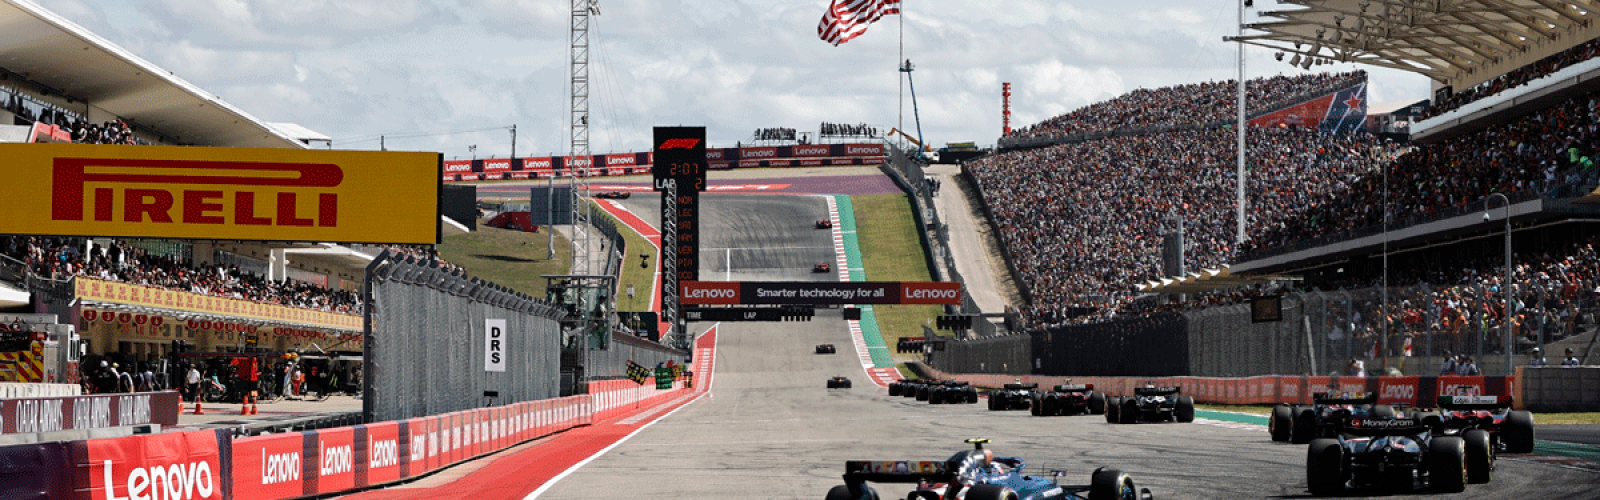 United States Formula 1 Grand Prix ticket packages image